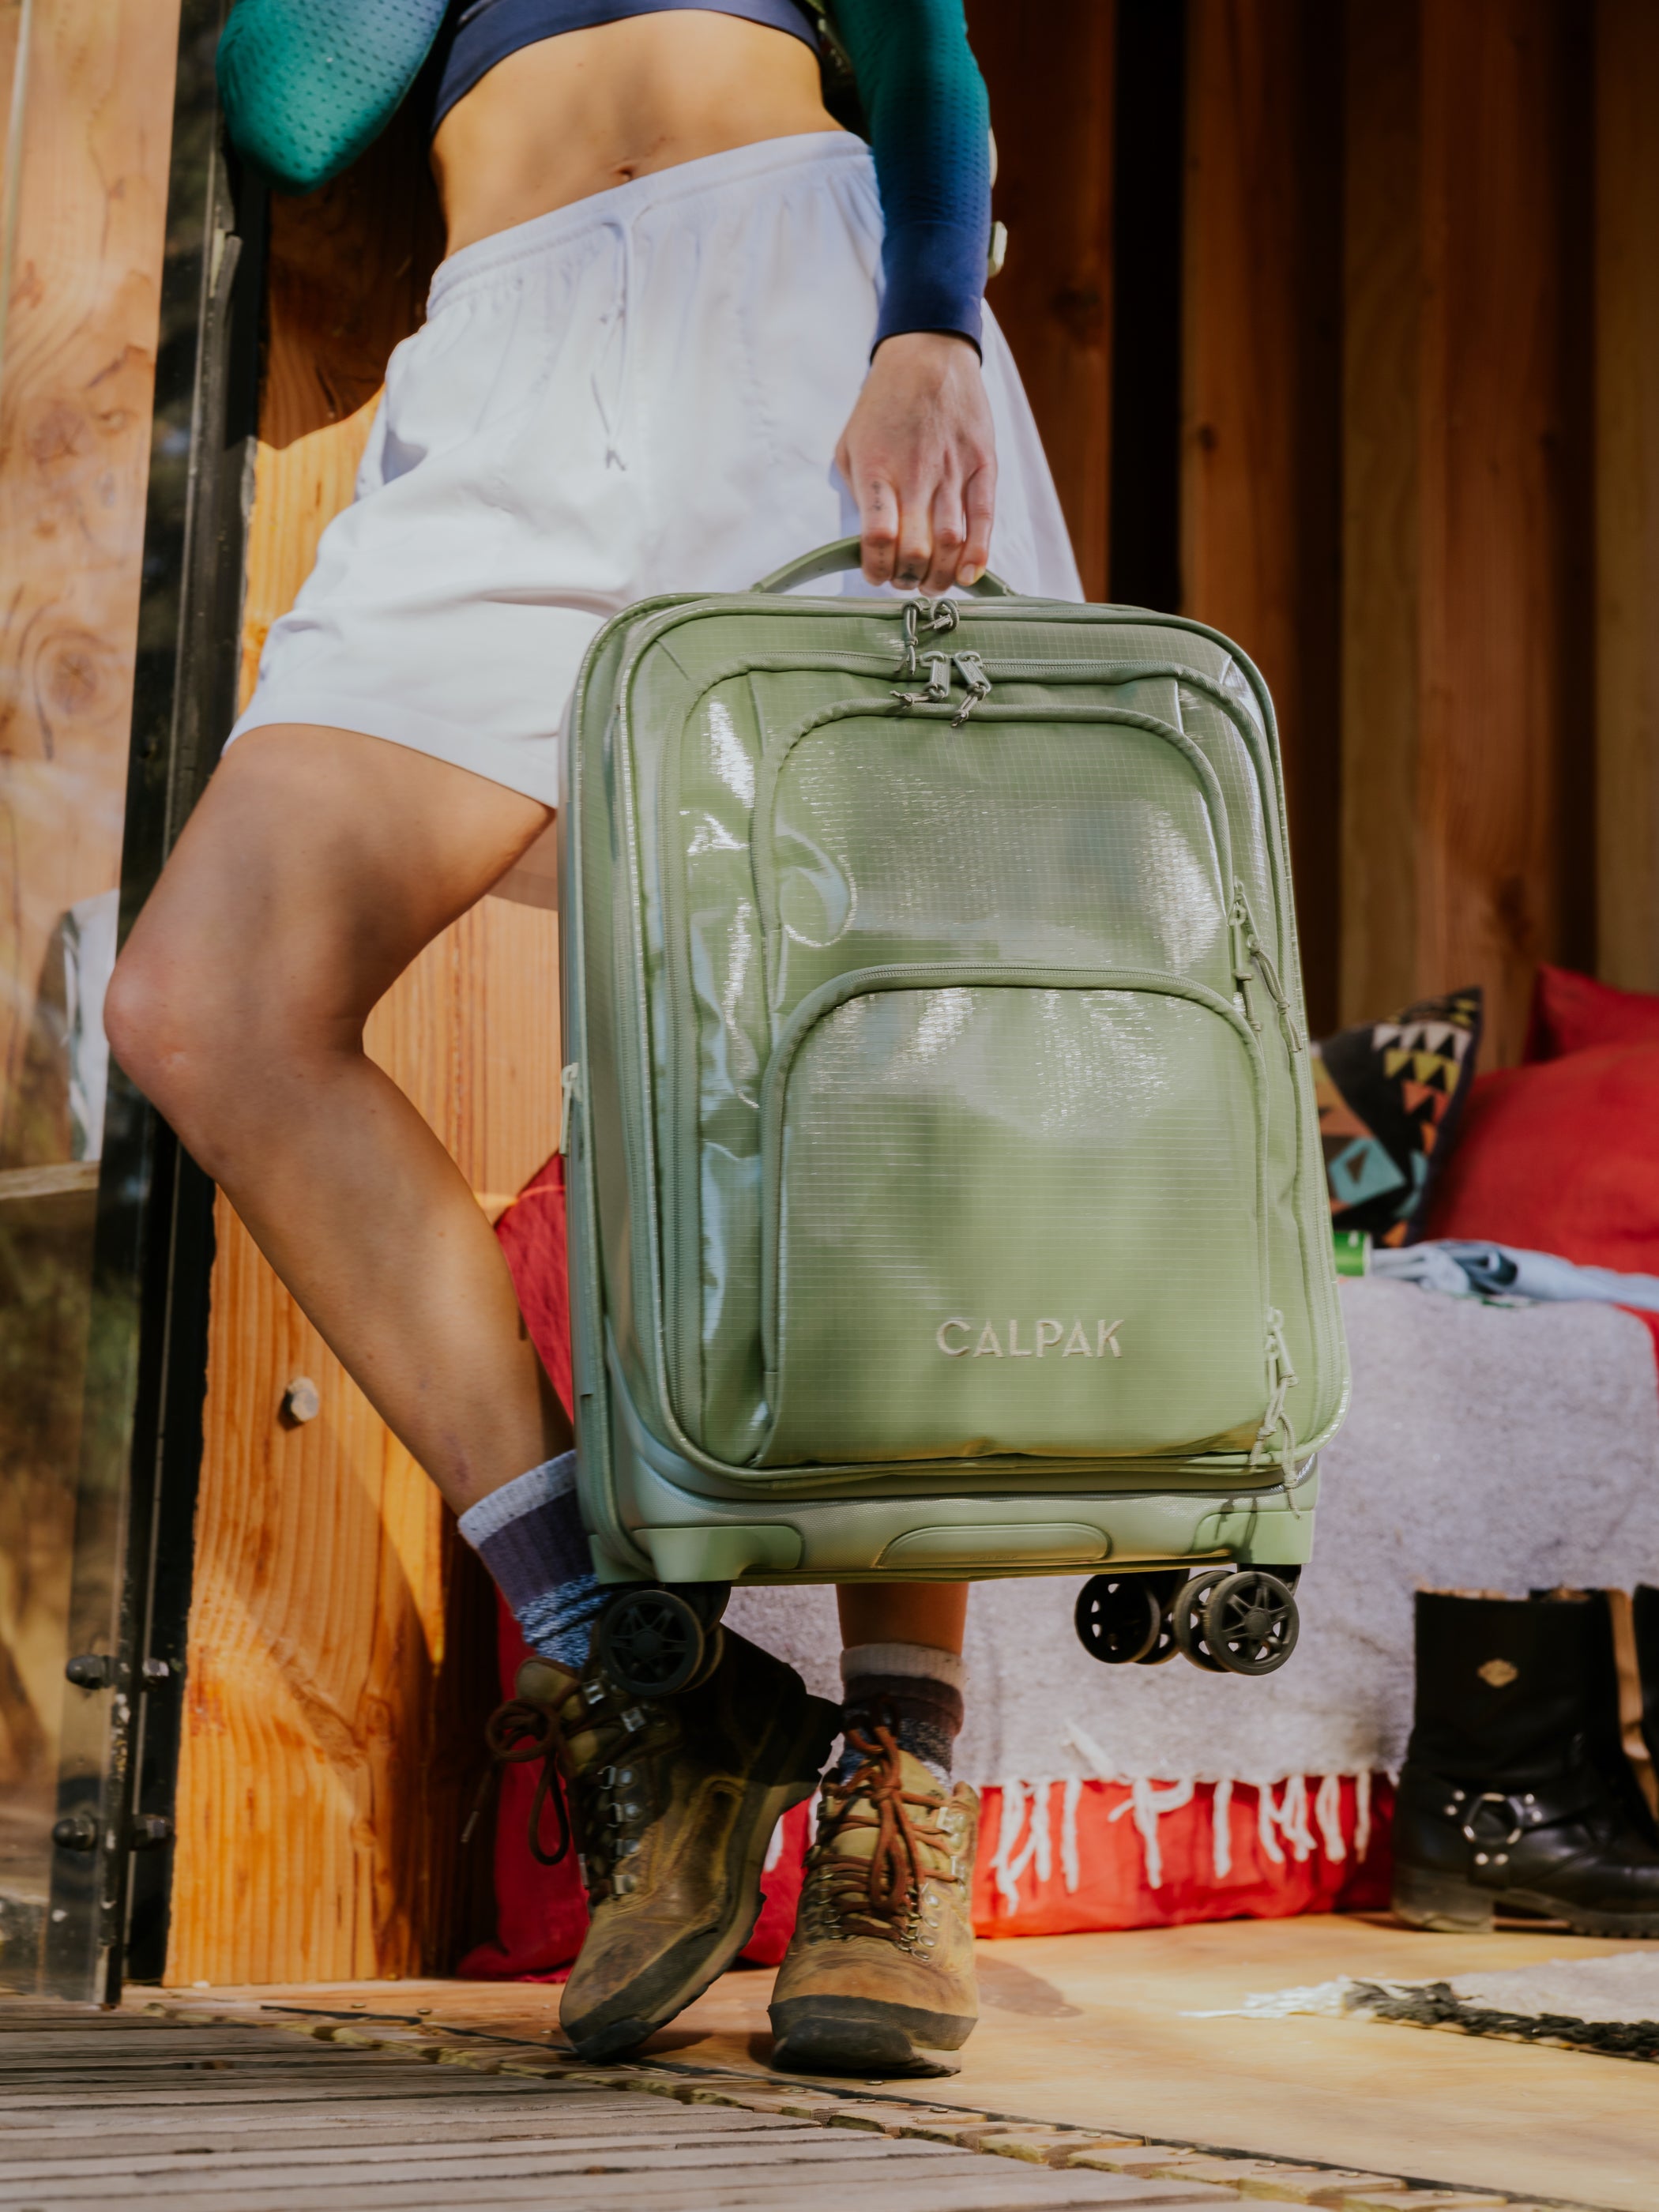 Away's New Soft-Sided Suitcases Are Made For Over-Packers